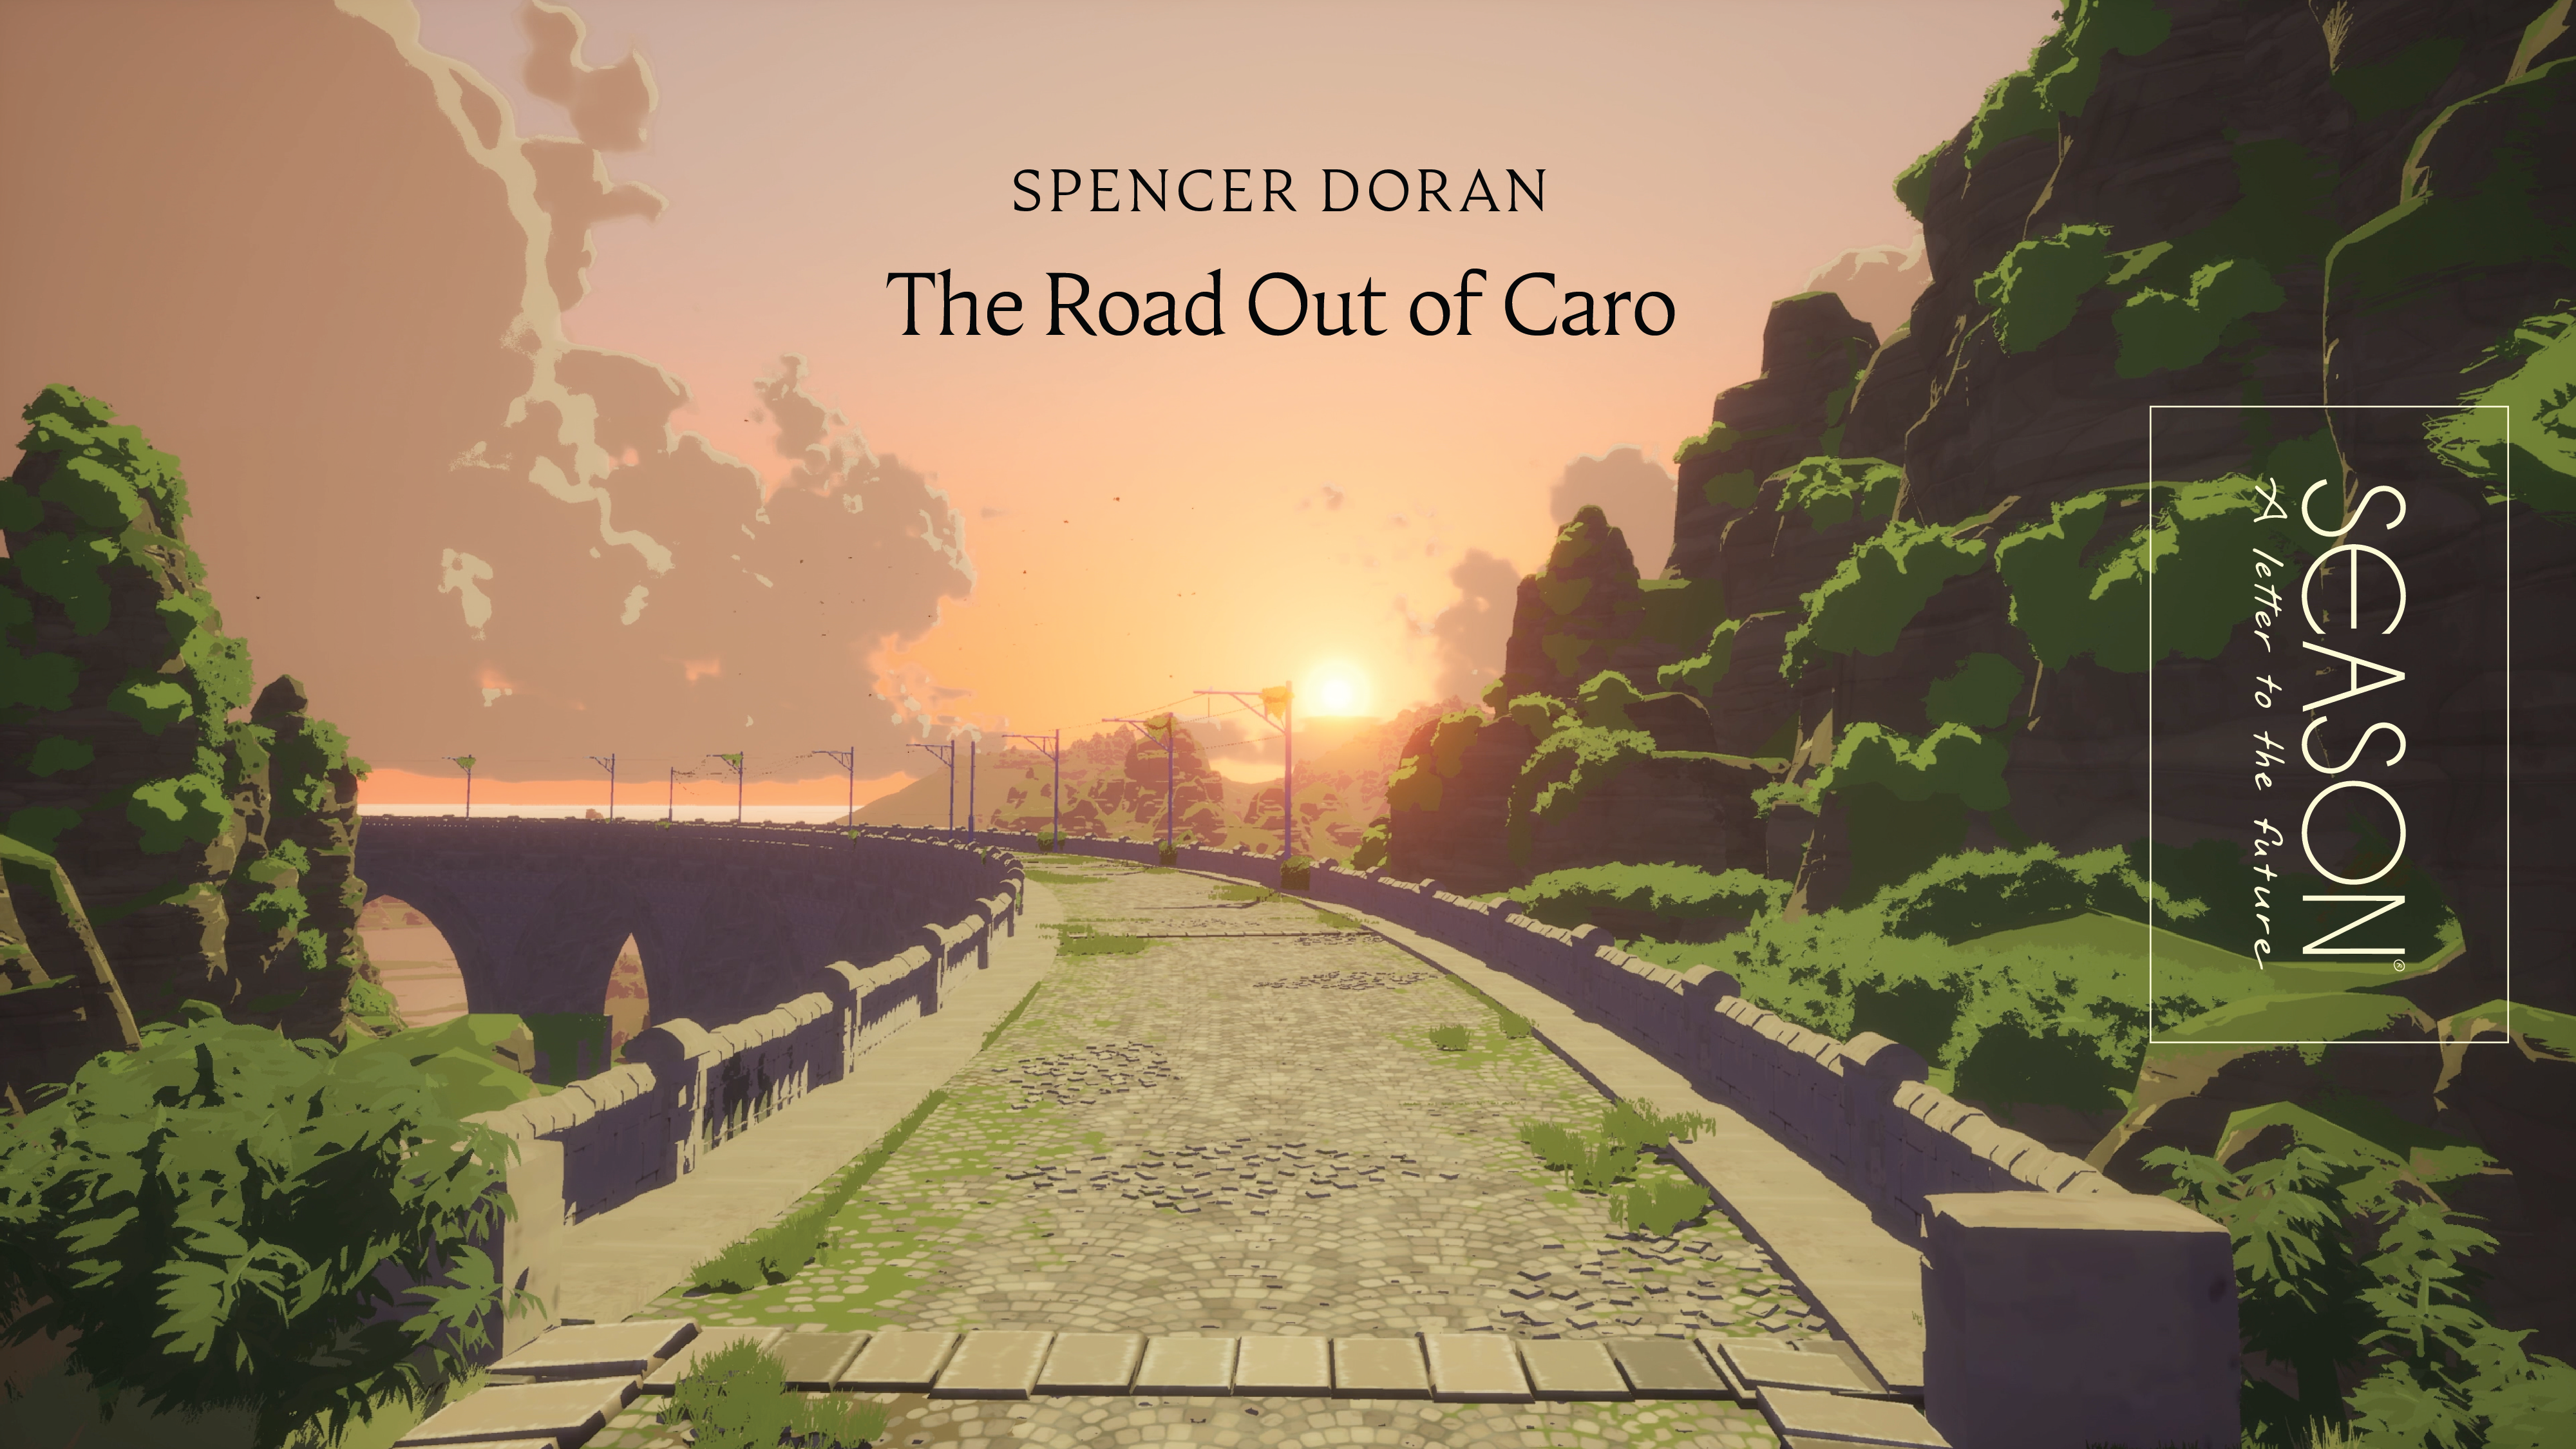 Link to Video for Spencer Doran – Road Out of Caro